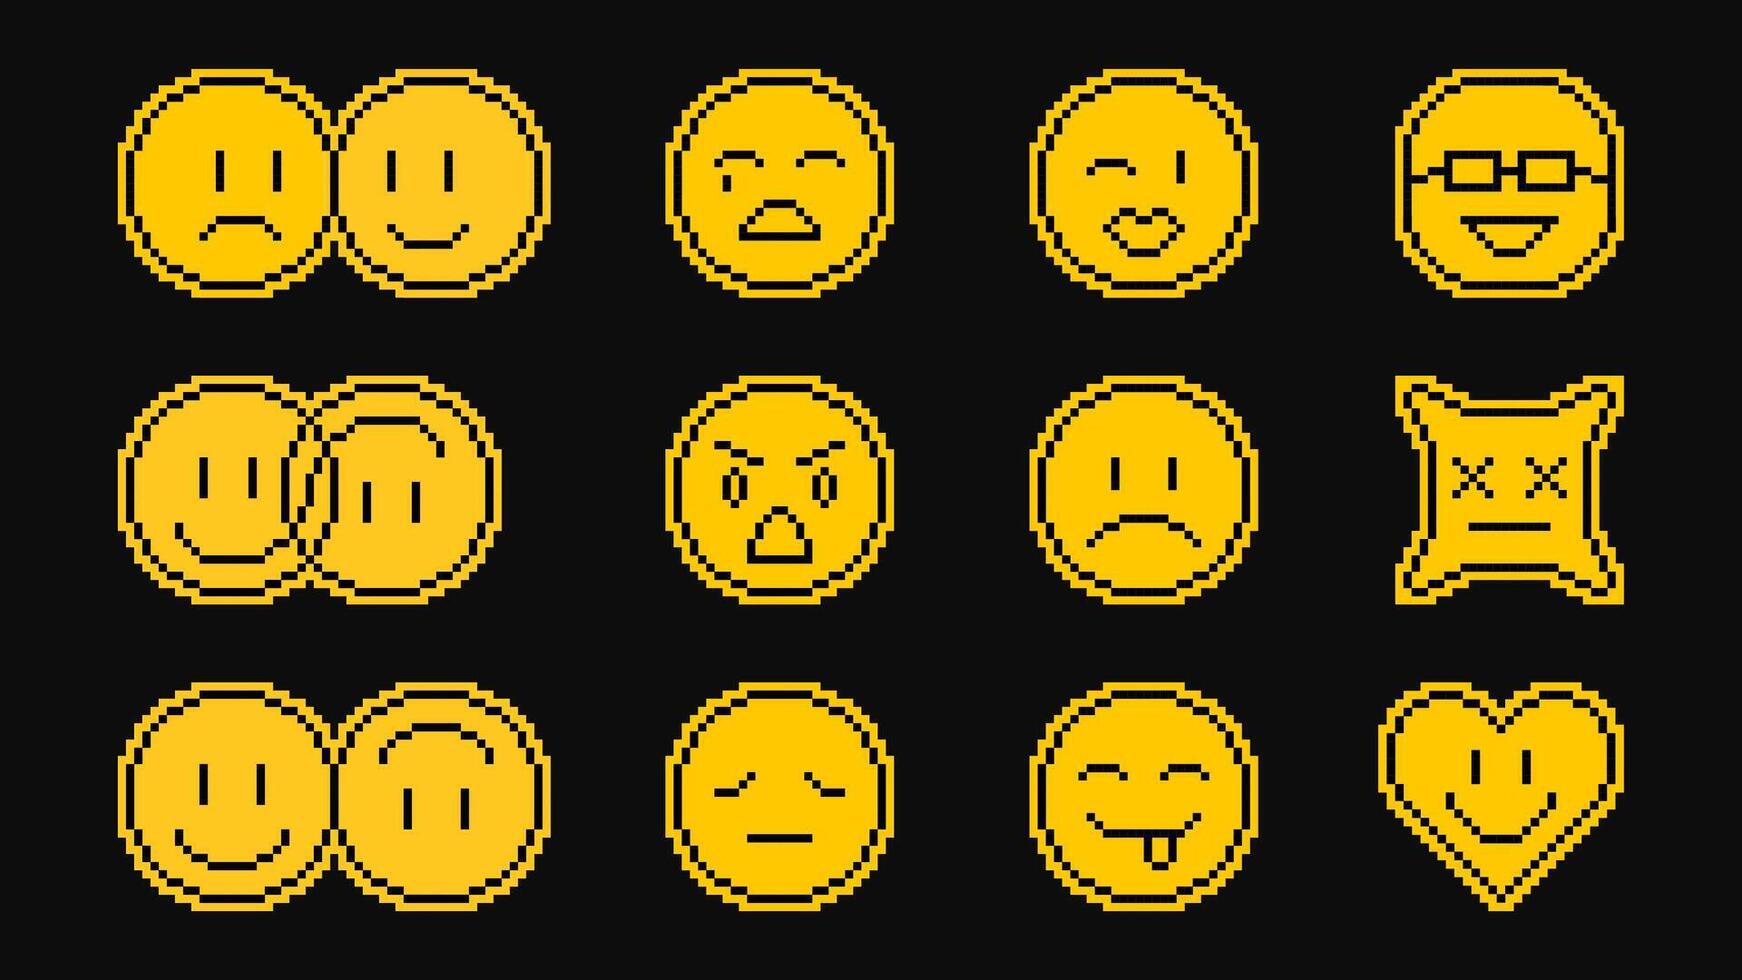 Pixel emoji smile pack. Various pixel art smiles with laugh or love emotions, combined faces, message chat emoticons and expression smiles, vector stickers. 8bit acid style pixelated emoji face